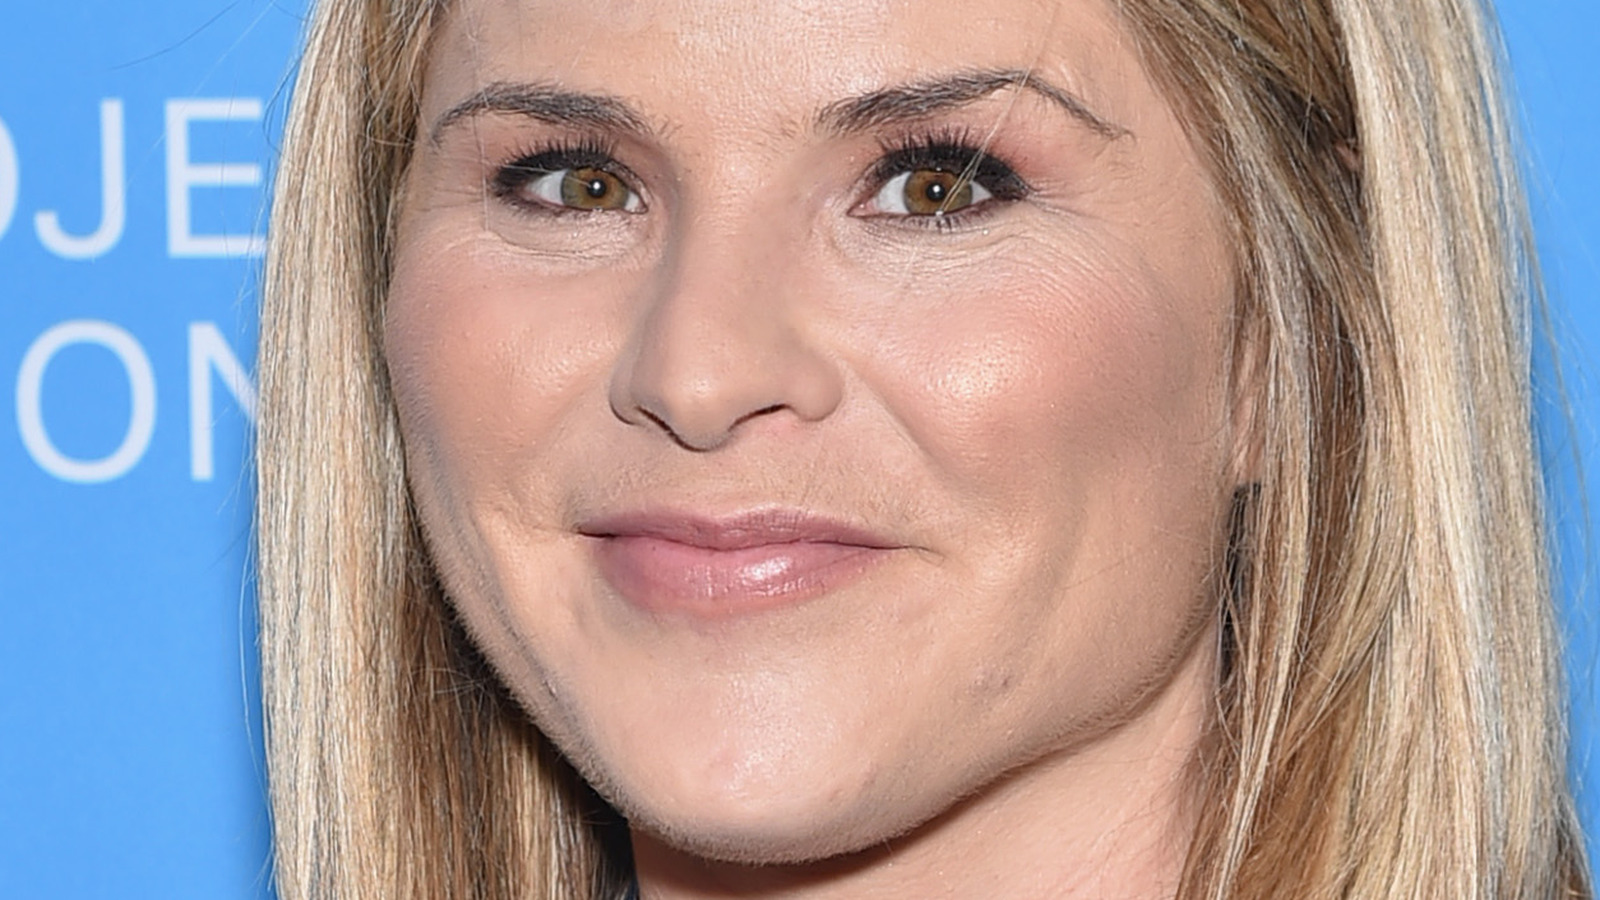 Jenna Bush Hager Just Dropped Personal News About Her Twin Barbara